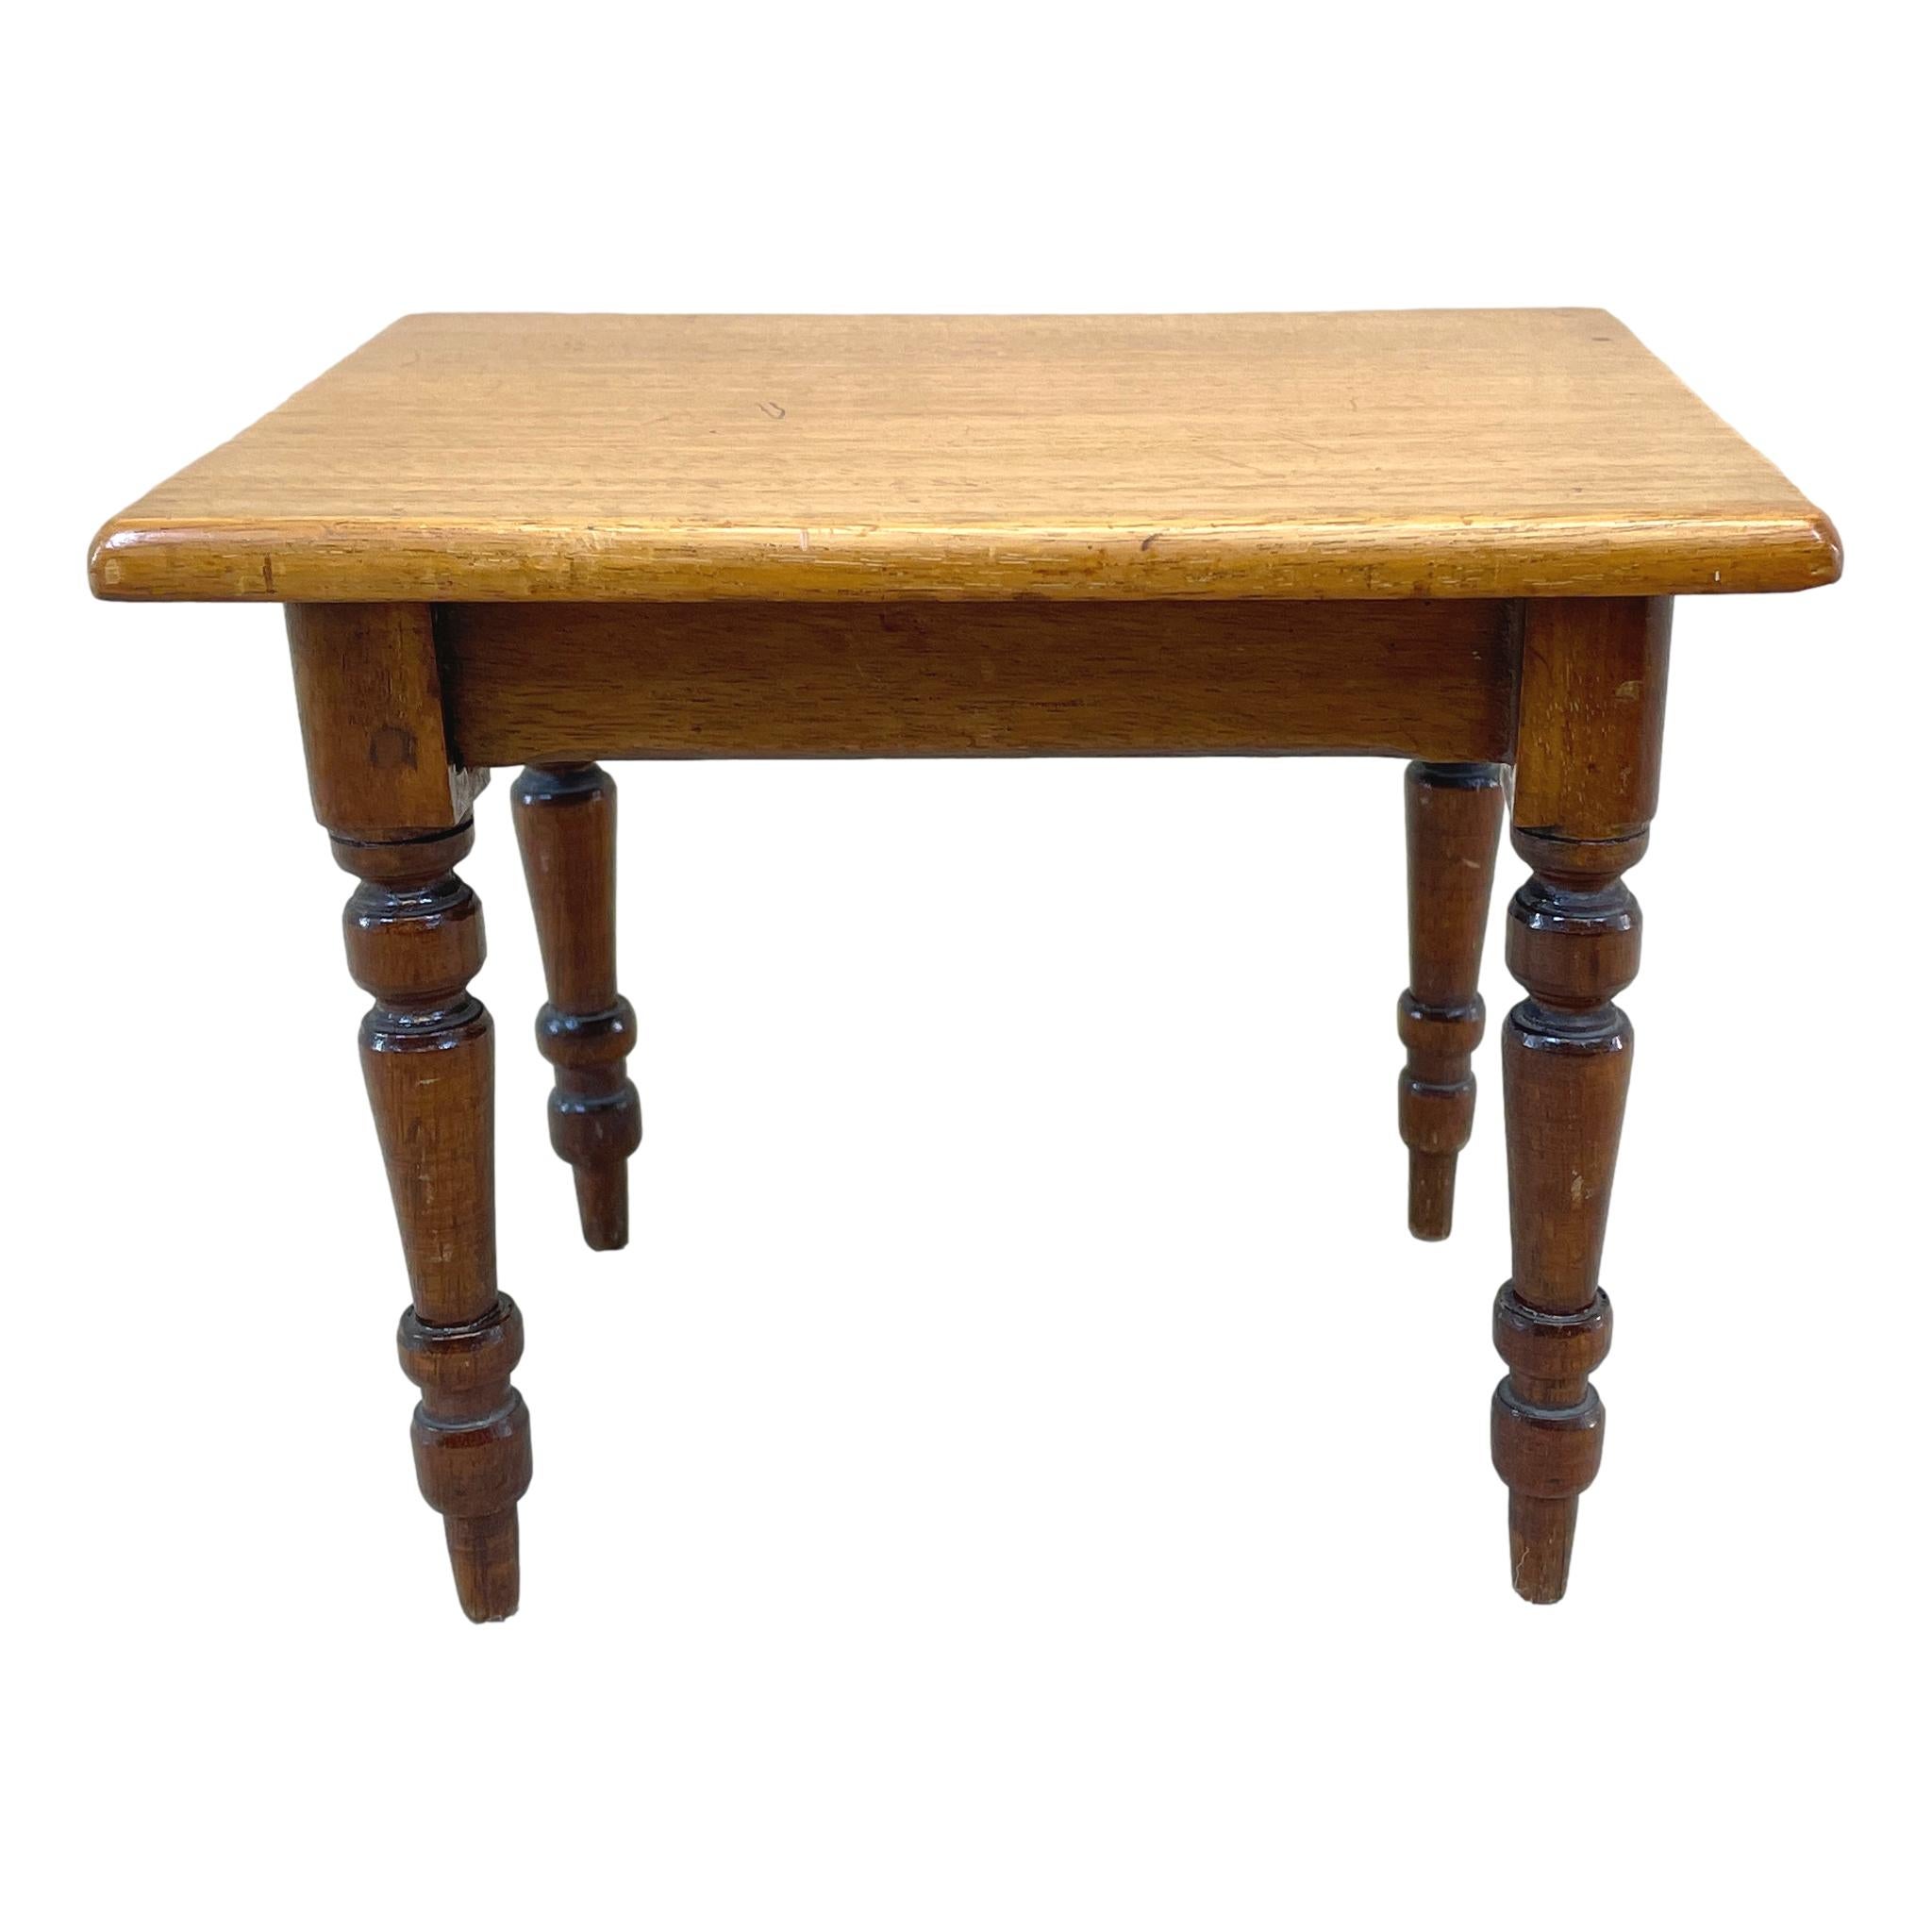 Victorian Miniature Mahogany Centre Table In Good Condition For Sale In Bedfordshire, GB